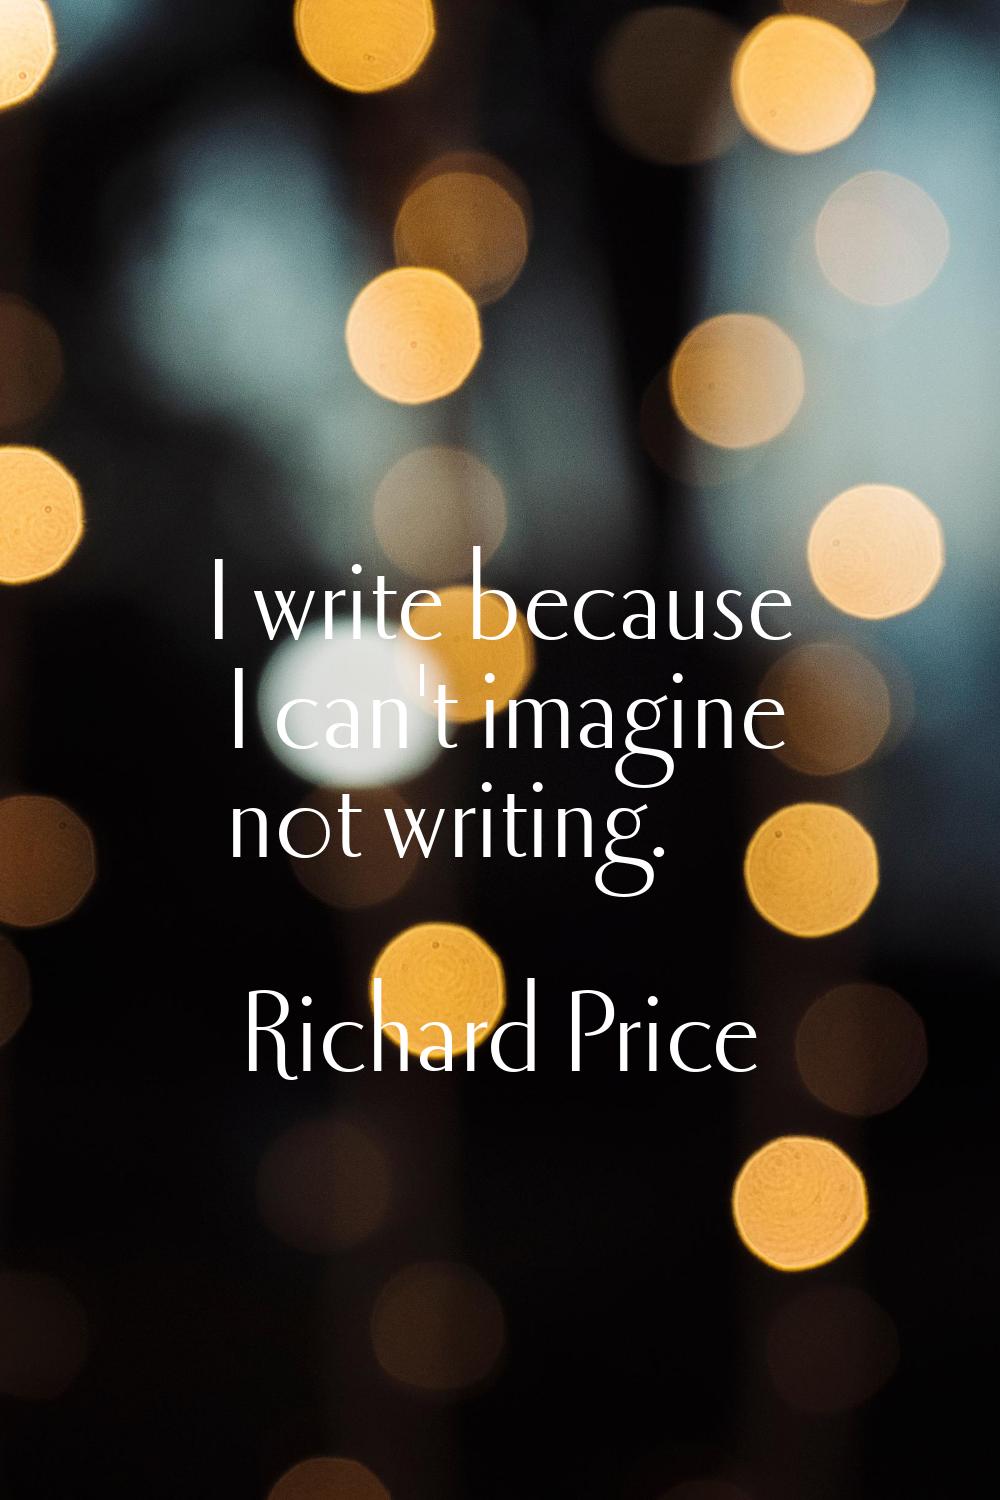 I write because I can't imagine not writing.